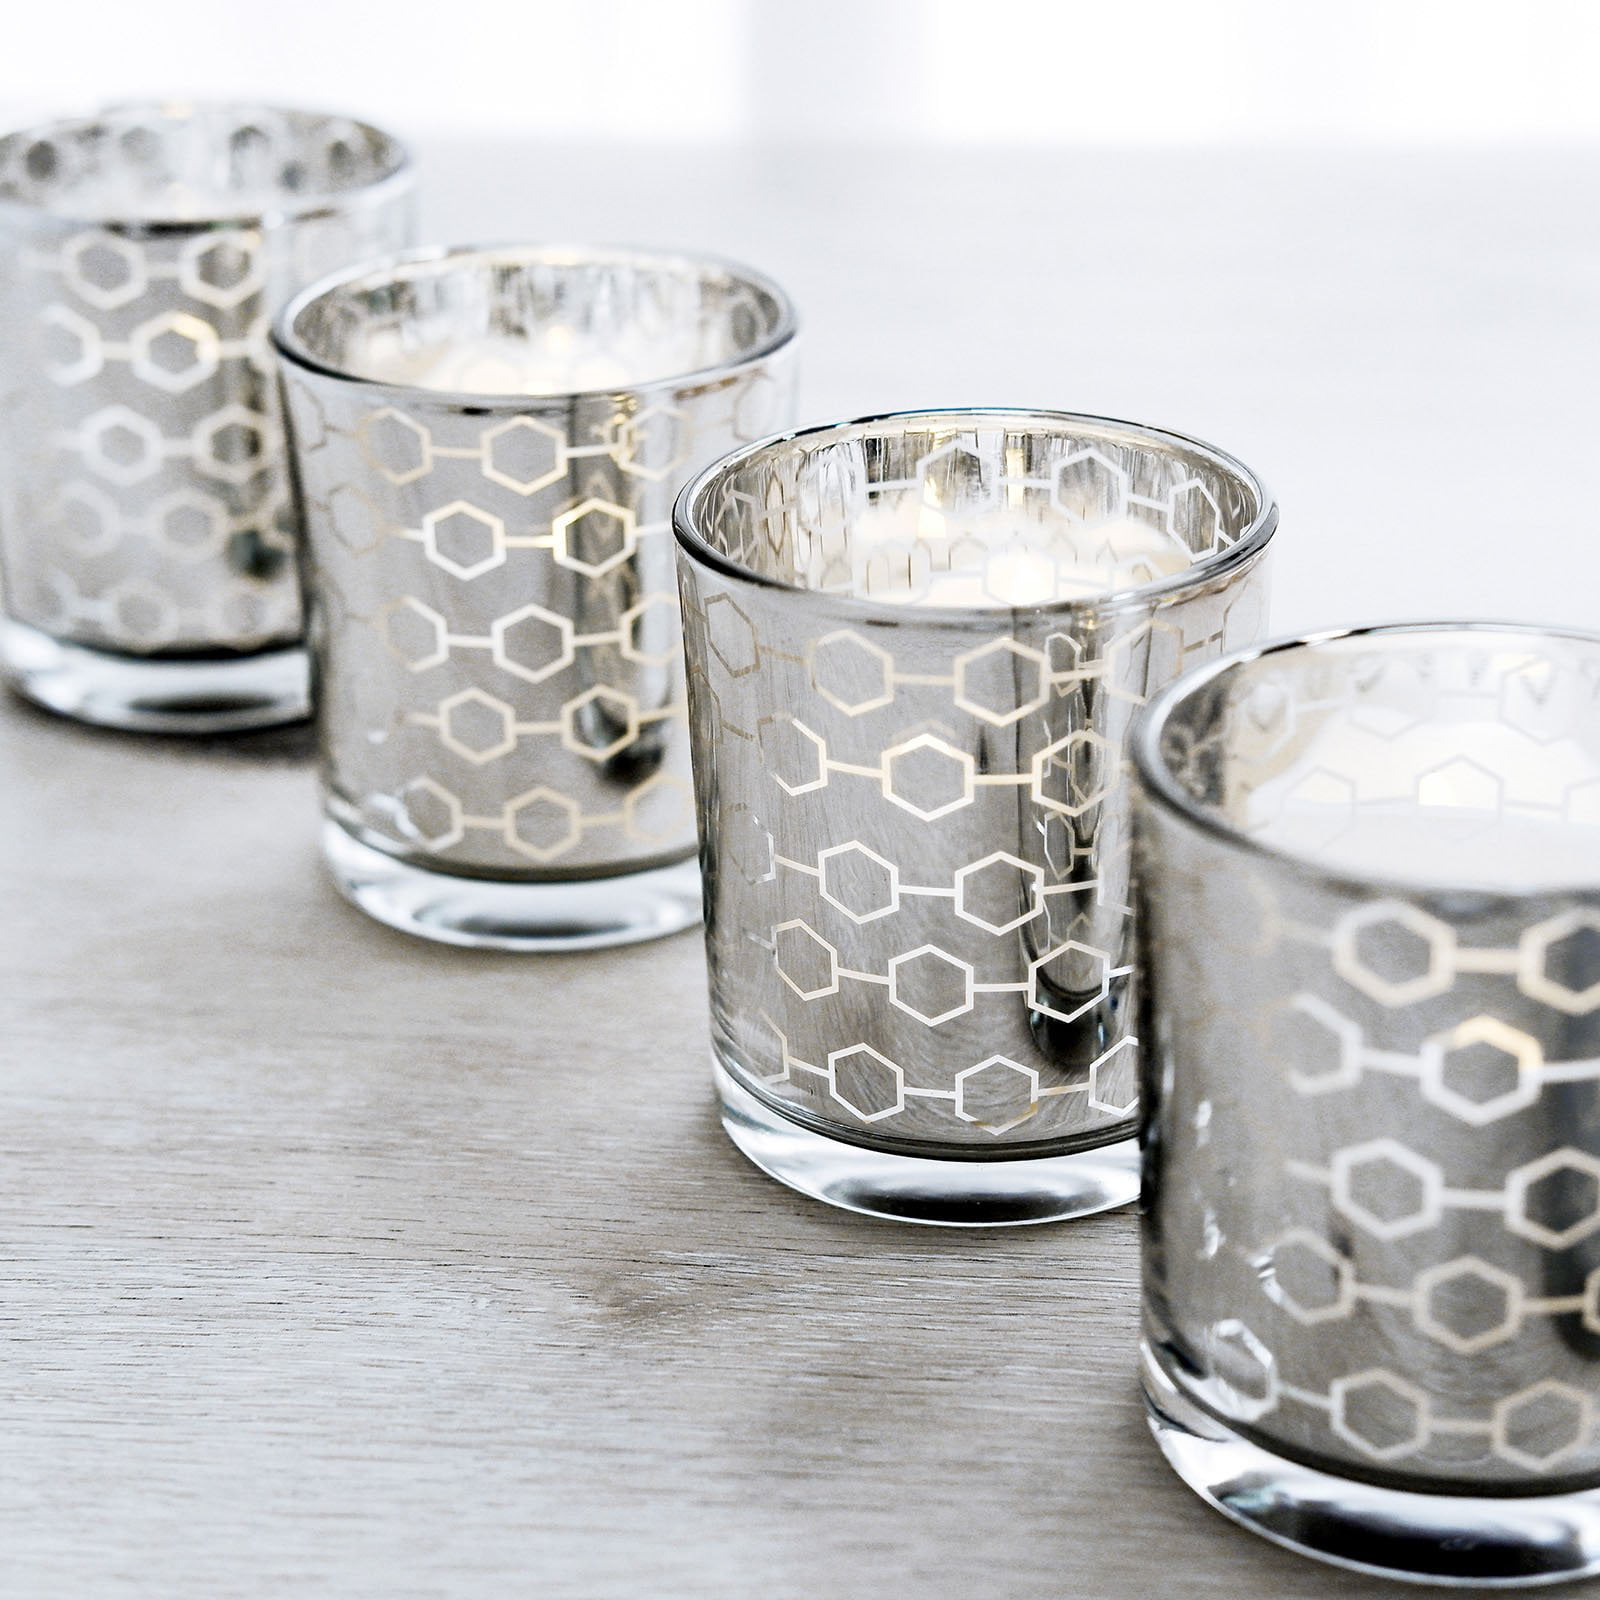 Efavormart 6 Pack Gold Mercury Glass Votive Candle Holders Honeycomb Design Tealight Holders for Home Decor Weddings Parties Table Centerpieces 